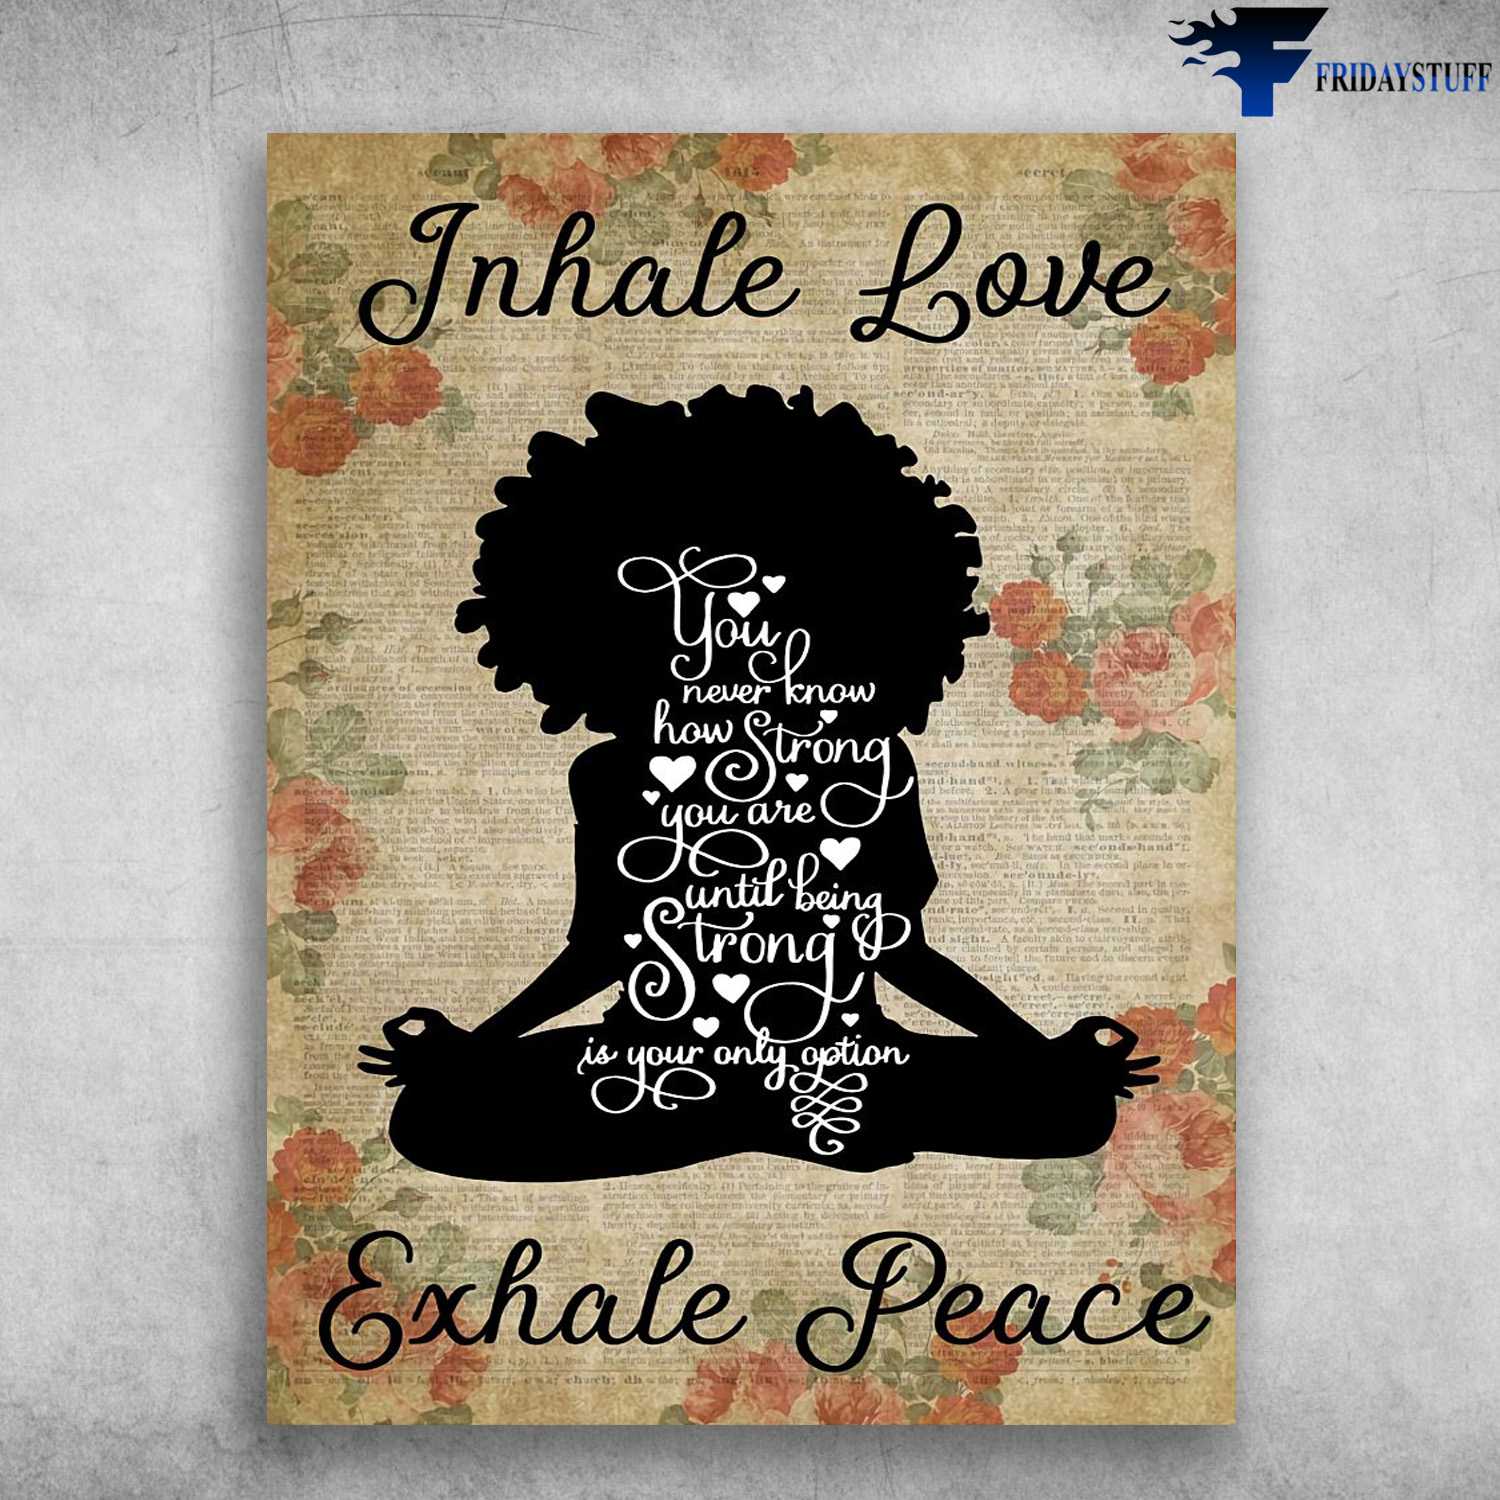 Yoga Girl, Yoga Poster - Ihale Love, Exhale Peace, You Never Know How Strong You Are, Until Being Strong, Is Your Only Option